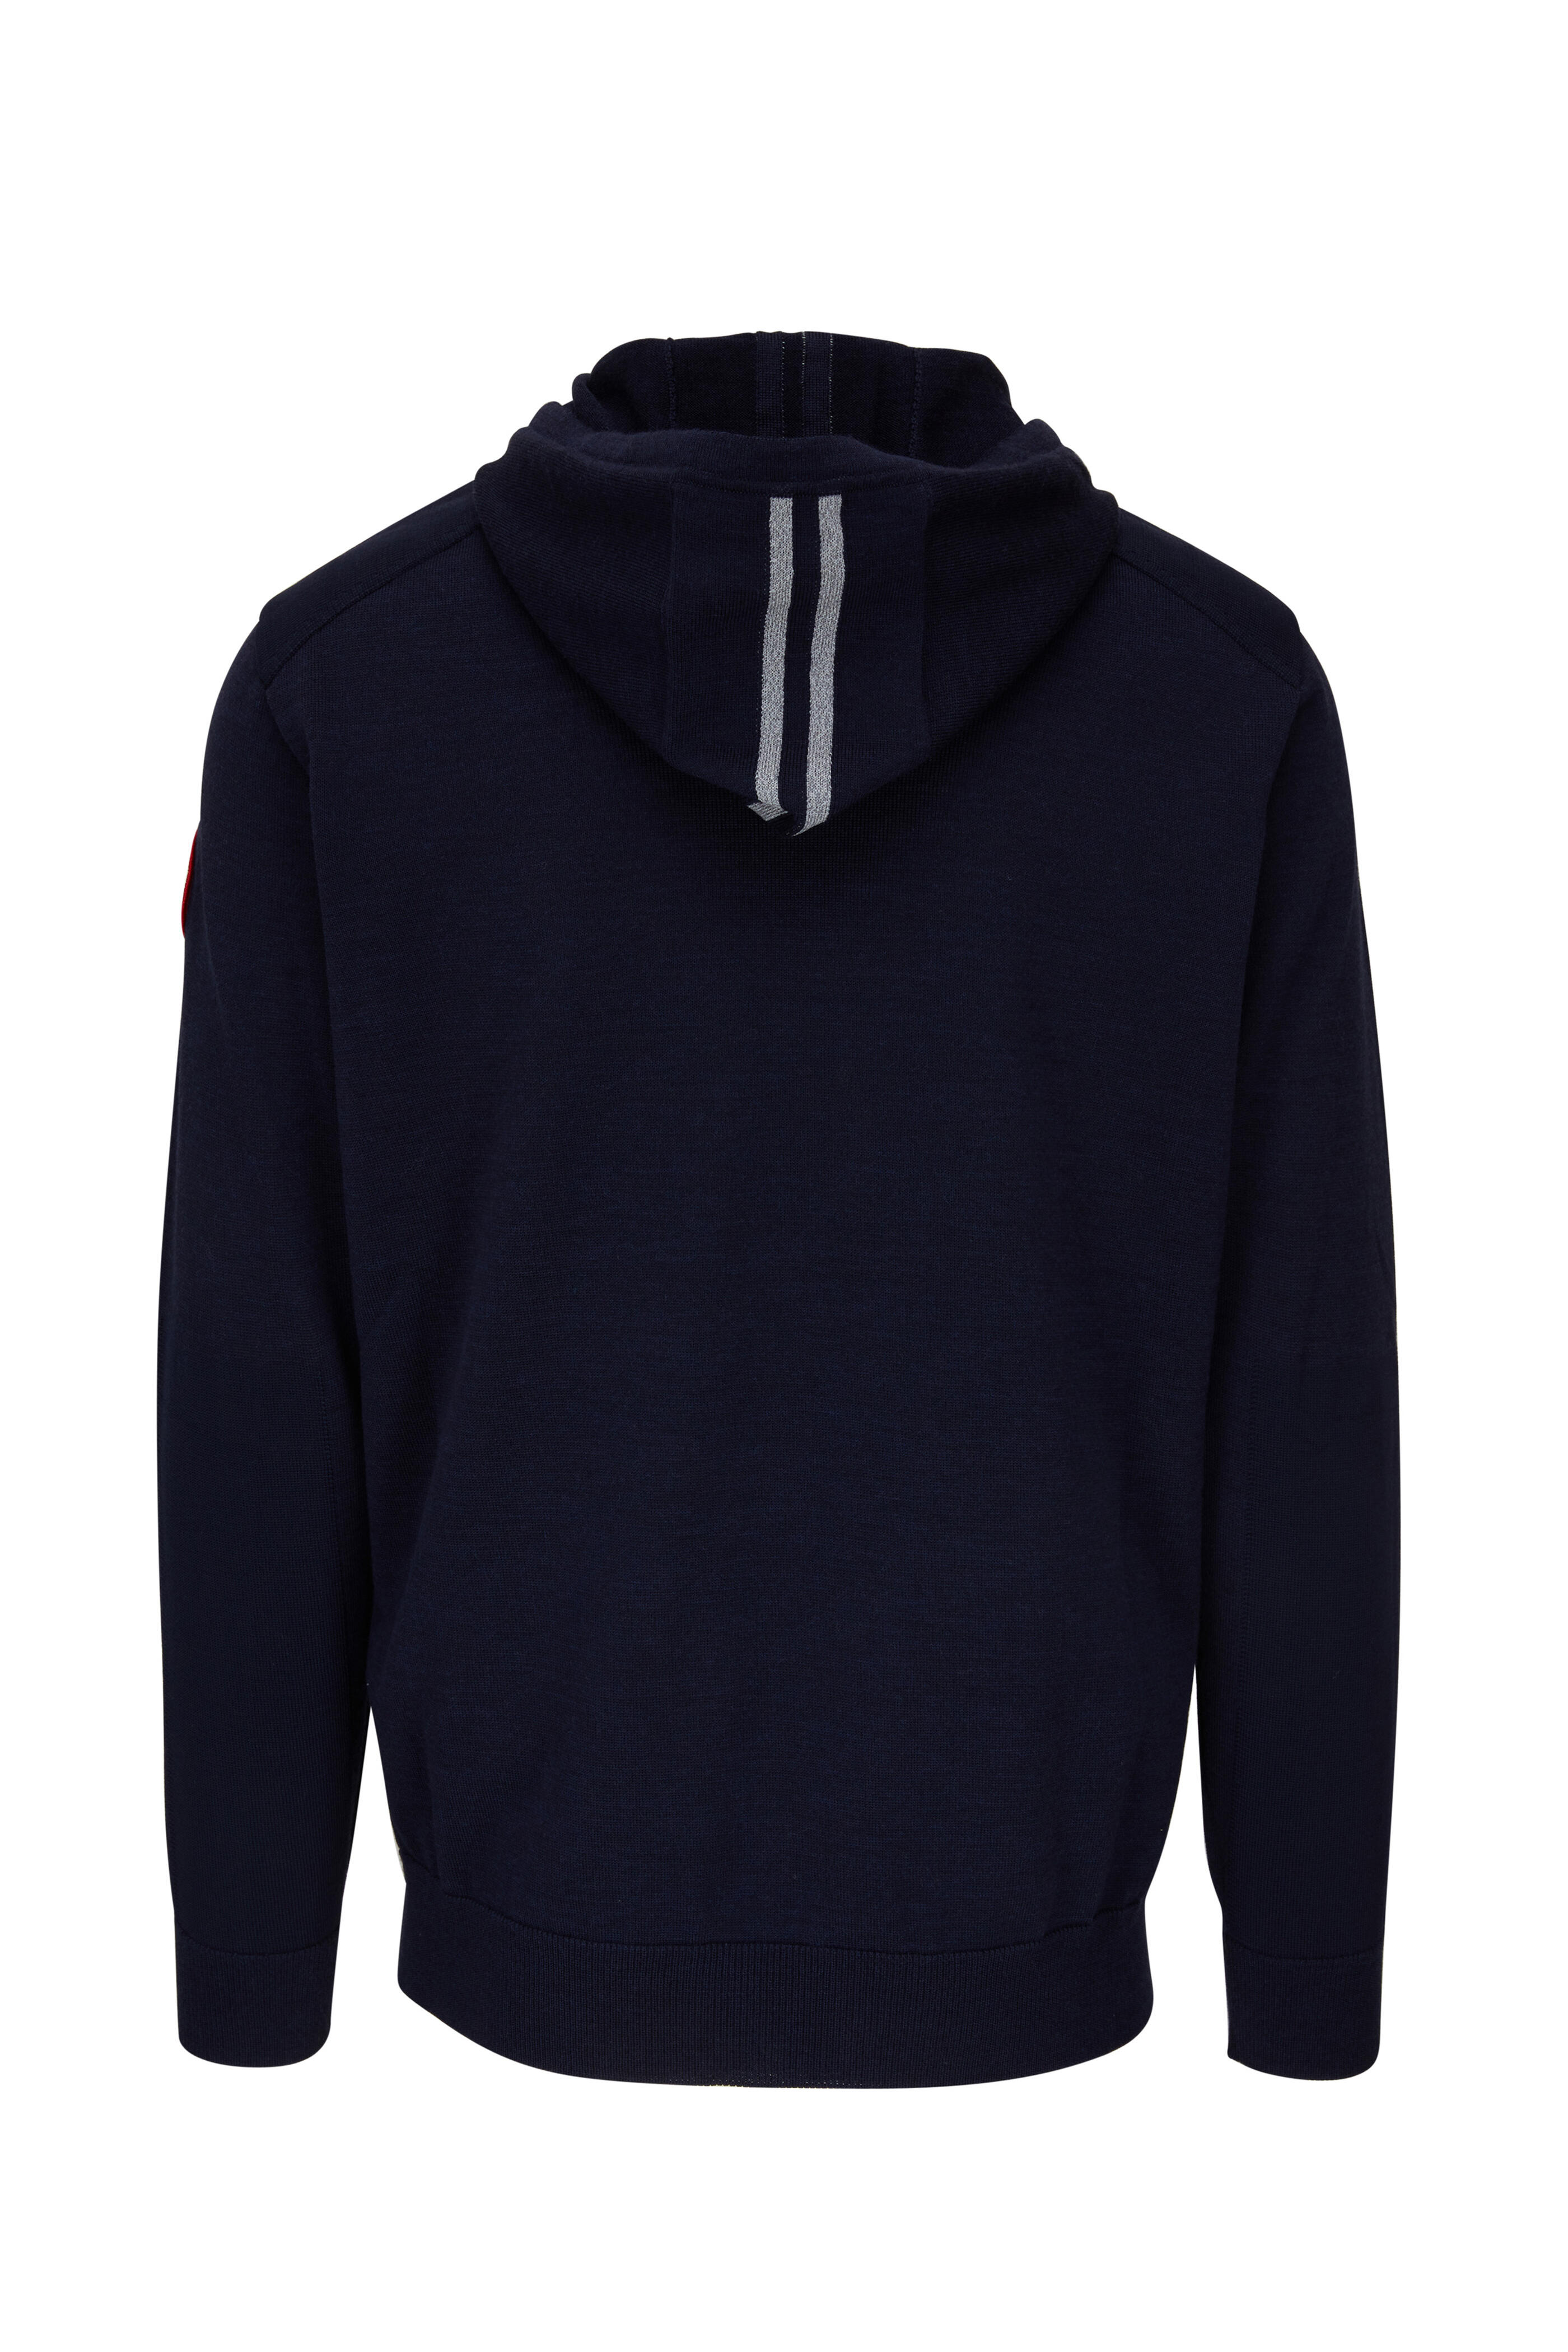 Canada Goose - Amherst Navy Wool Hoodie | Mitchell Stores